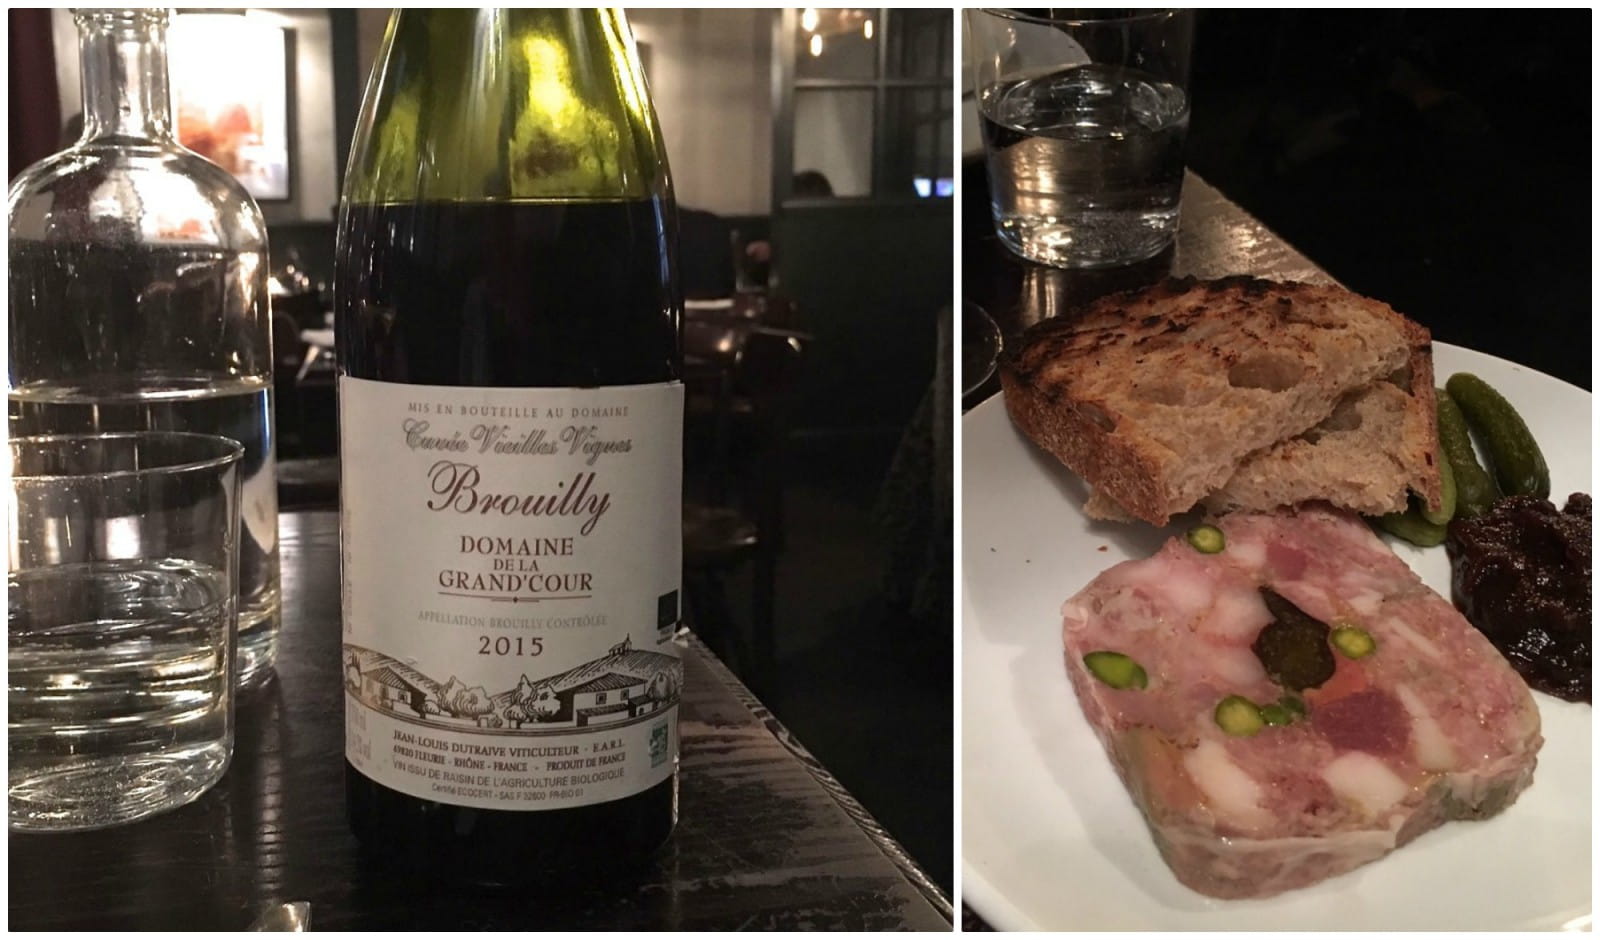 Pork and pistachio terrine and old vine Brouilly